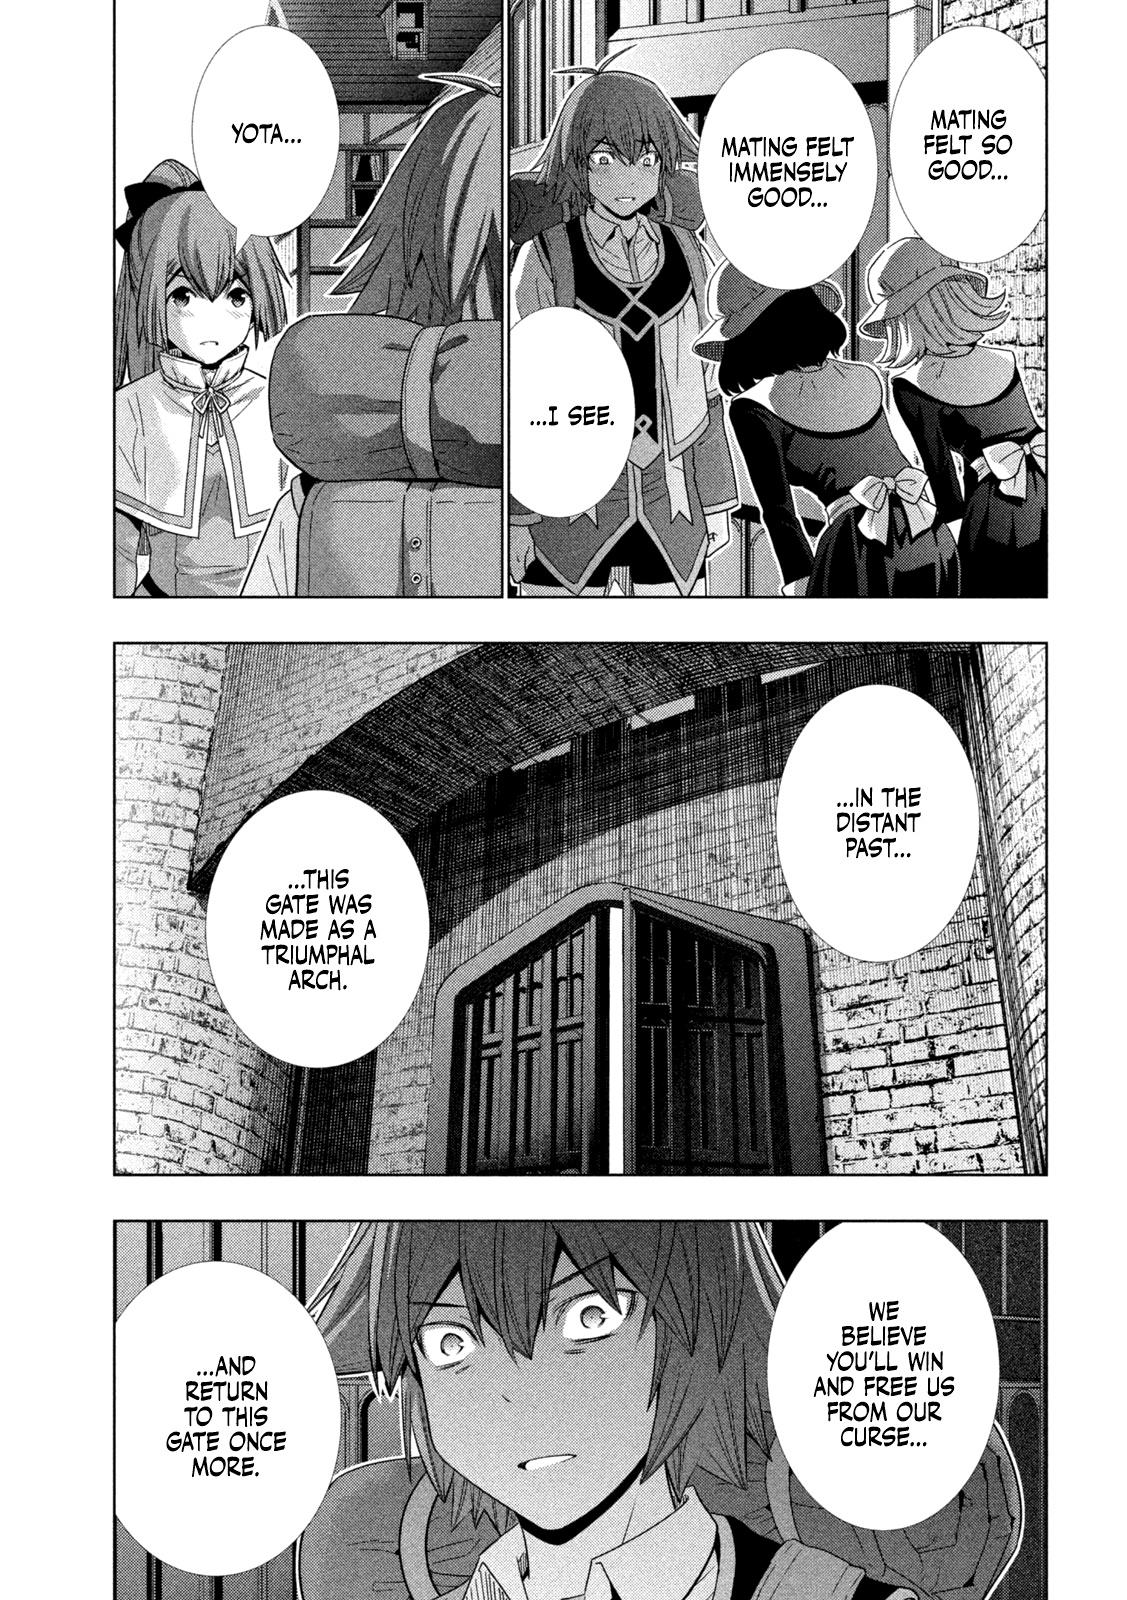 Parallel Paradise Chapter 163: At First Glance, An Isolated . . . House? page 10 - Mangakakalot